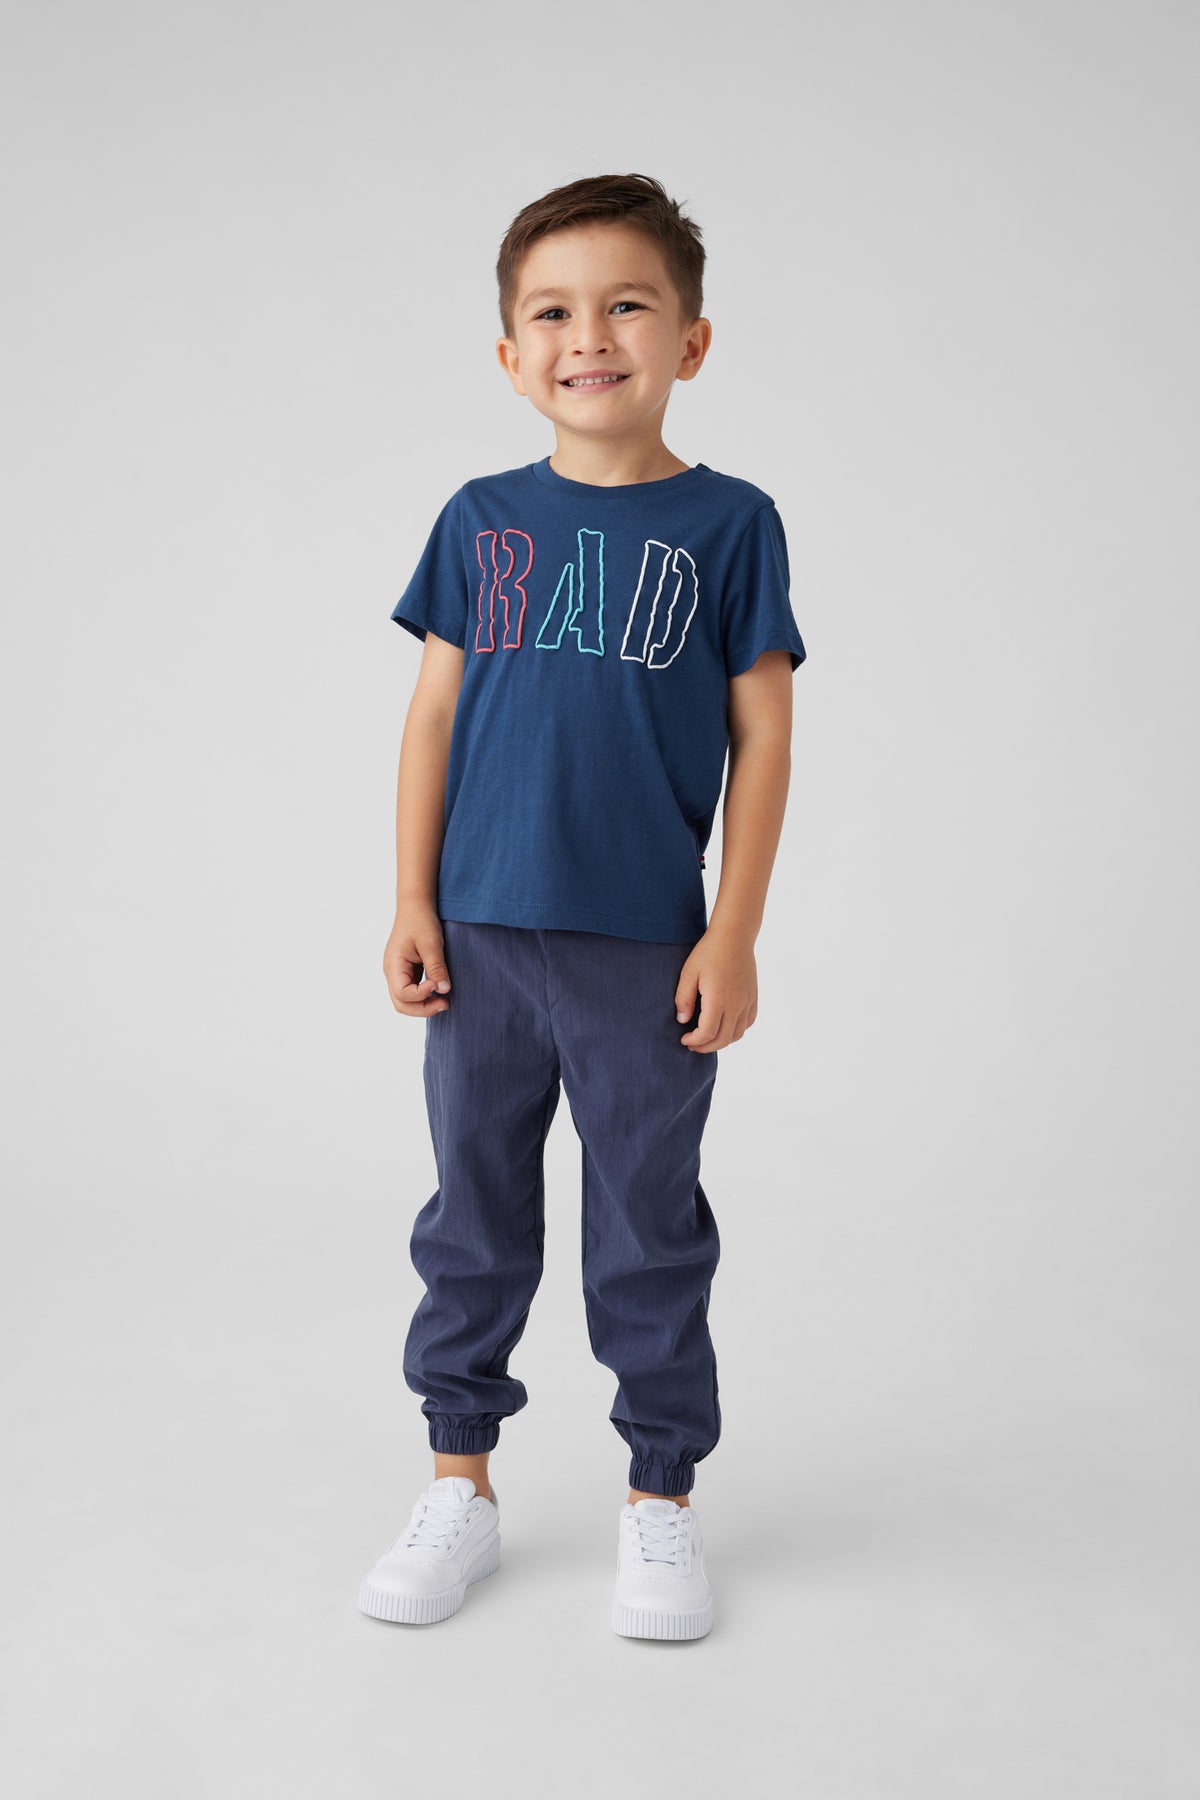 Kid's Clothing, California Style Clothes, Kid's Graphic Tees – Sol Angeles